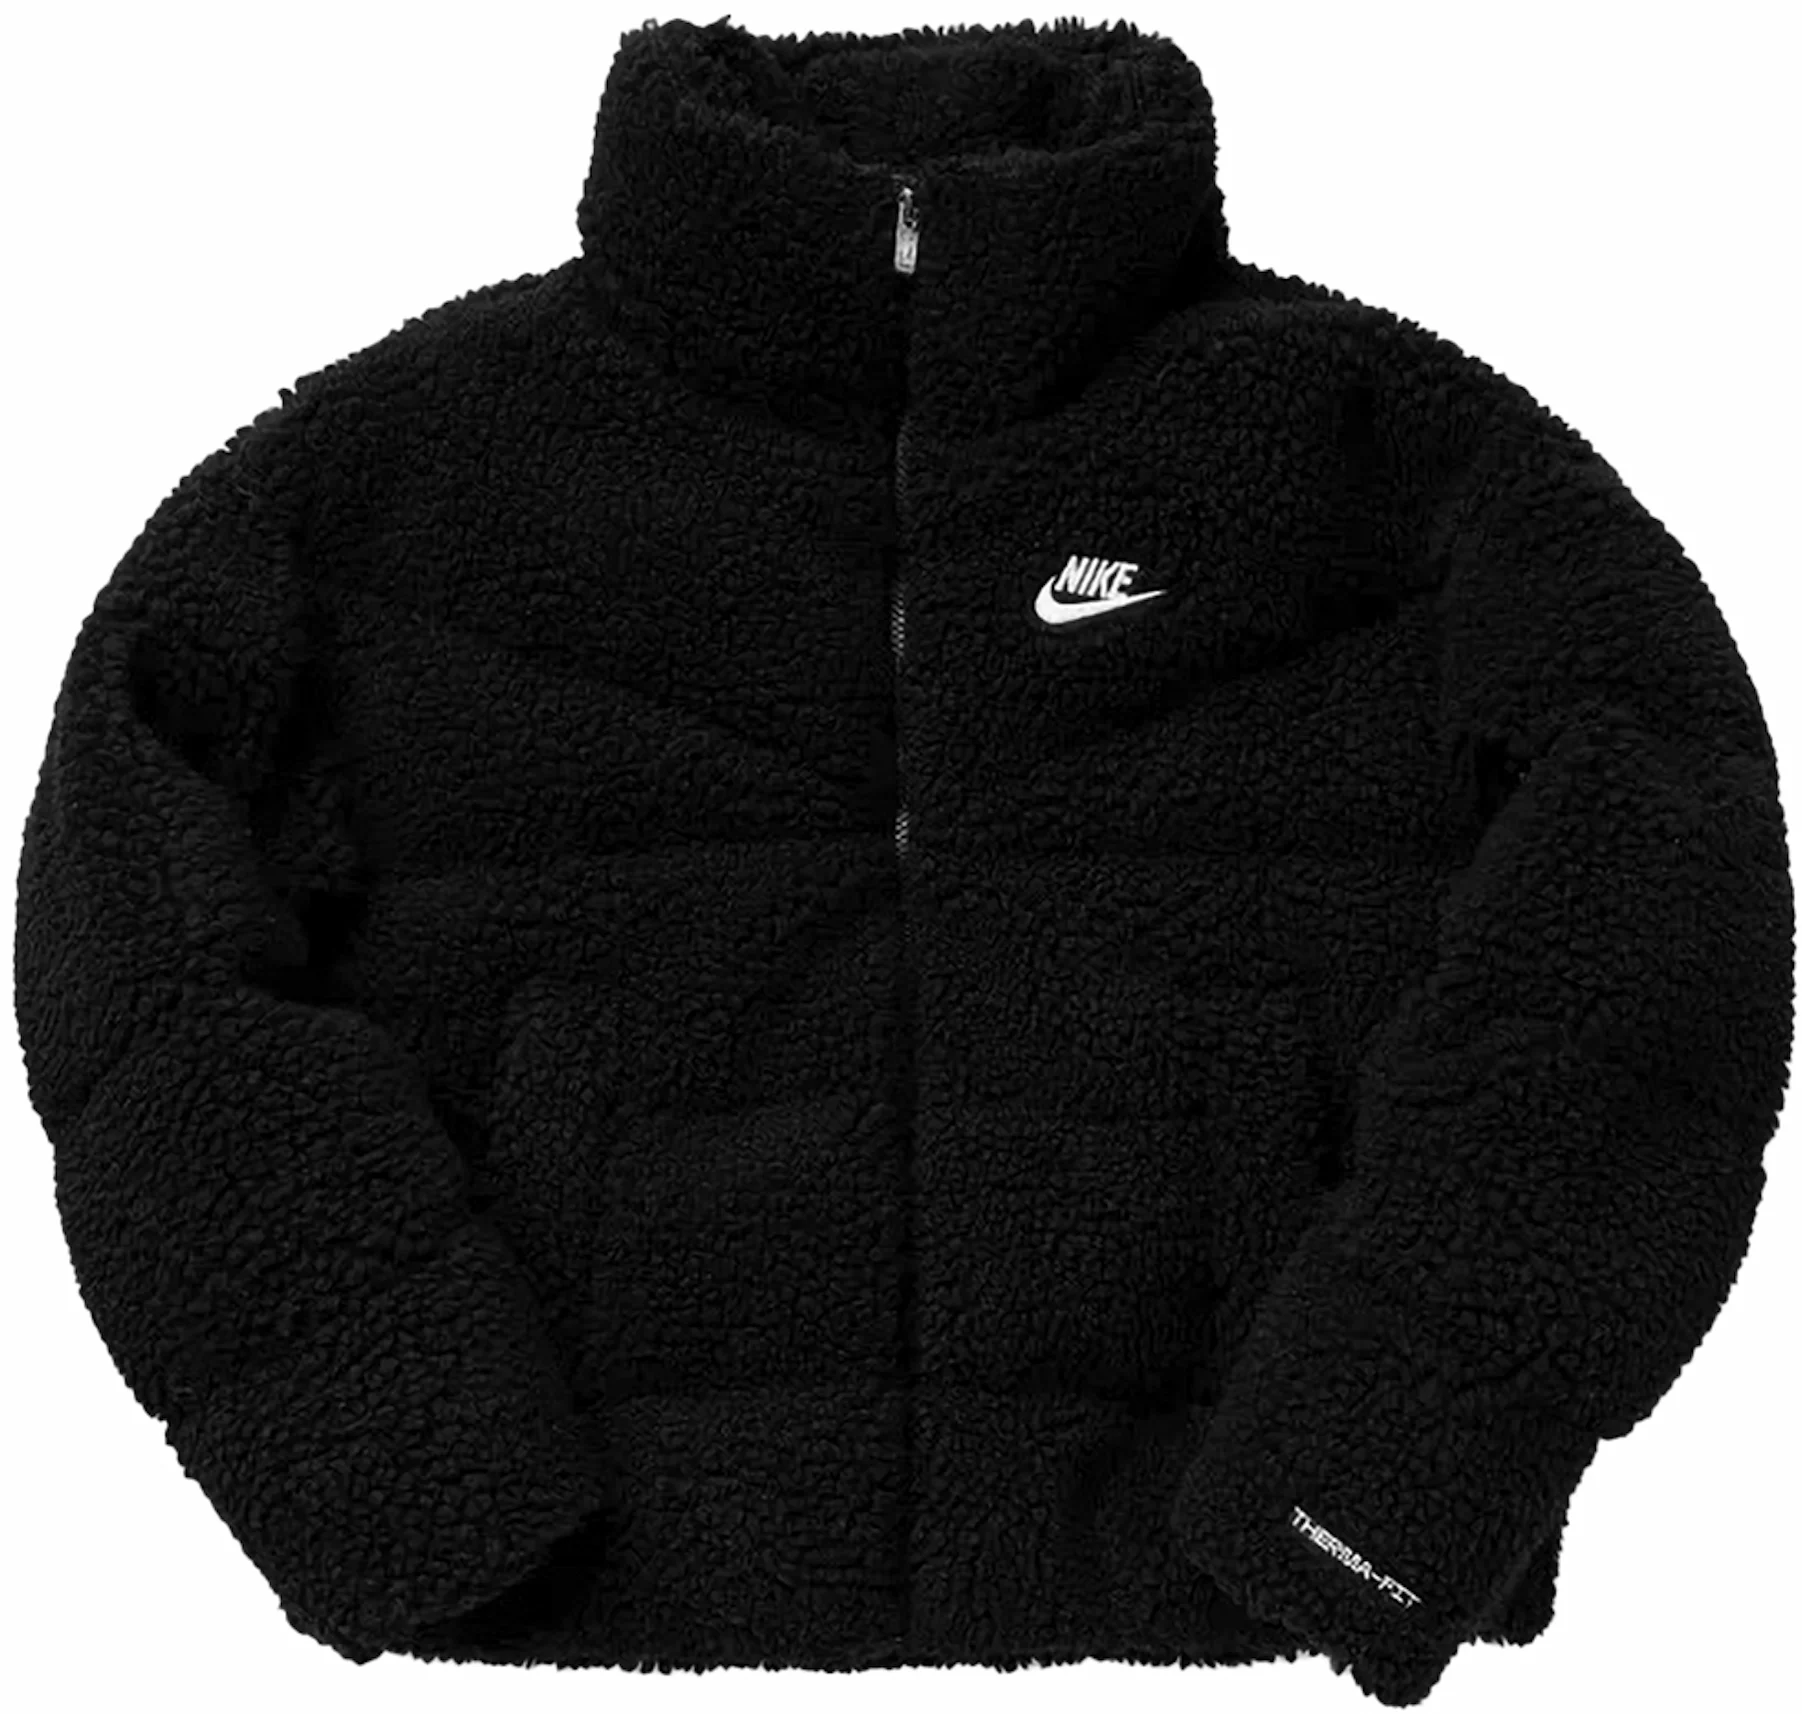 Nike Sportswear Therma-FIT City Series Women's Down Hooded Jacket, Pink  Oxford/Black/Black, SMALL